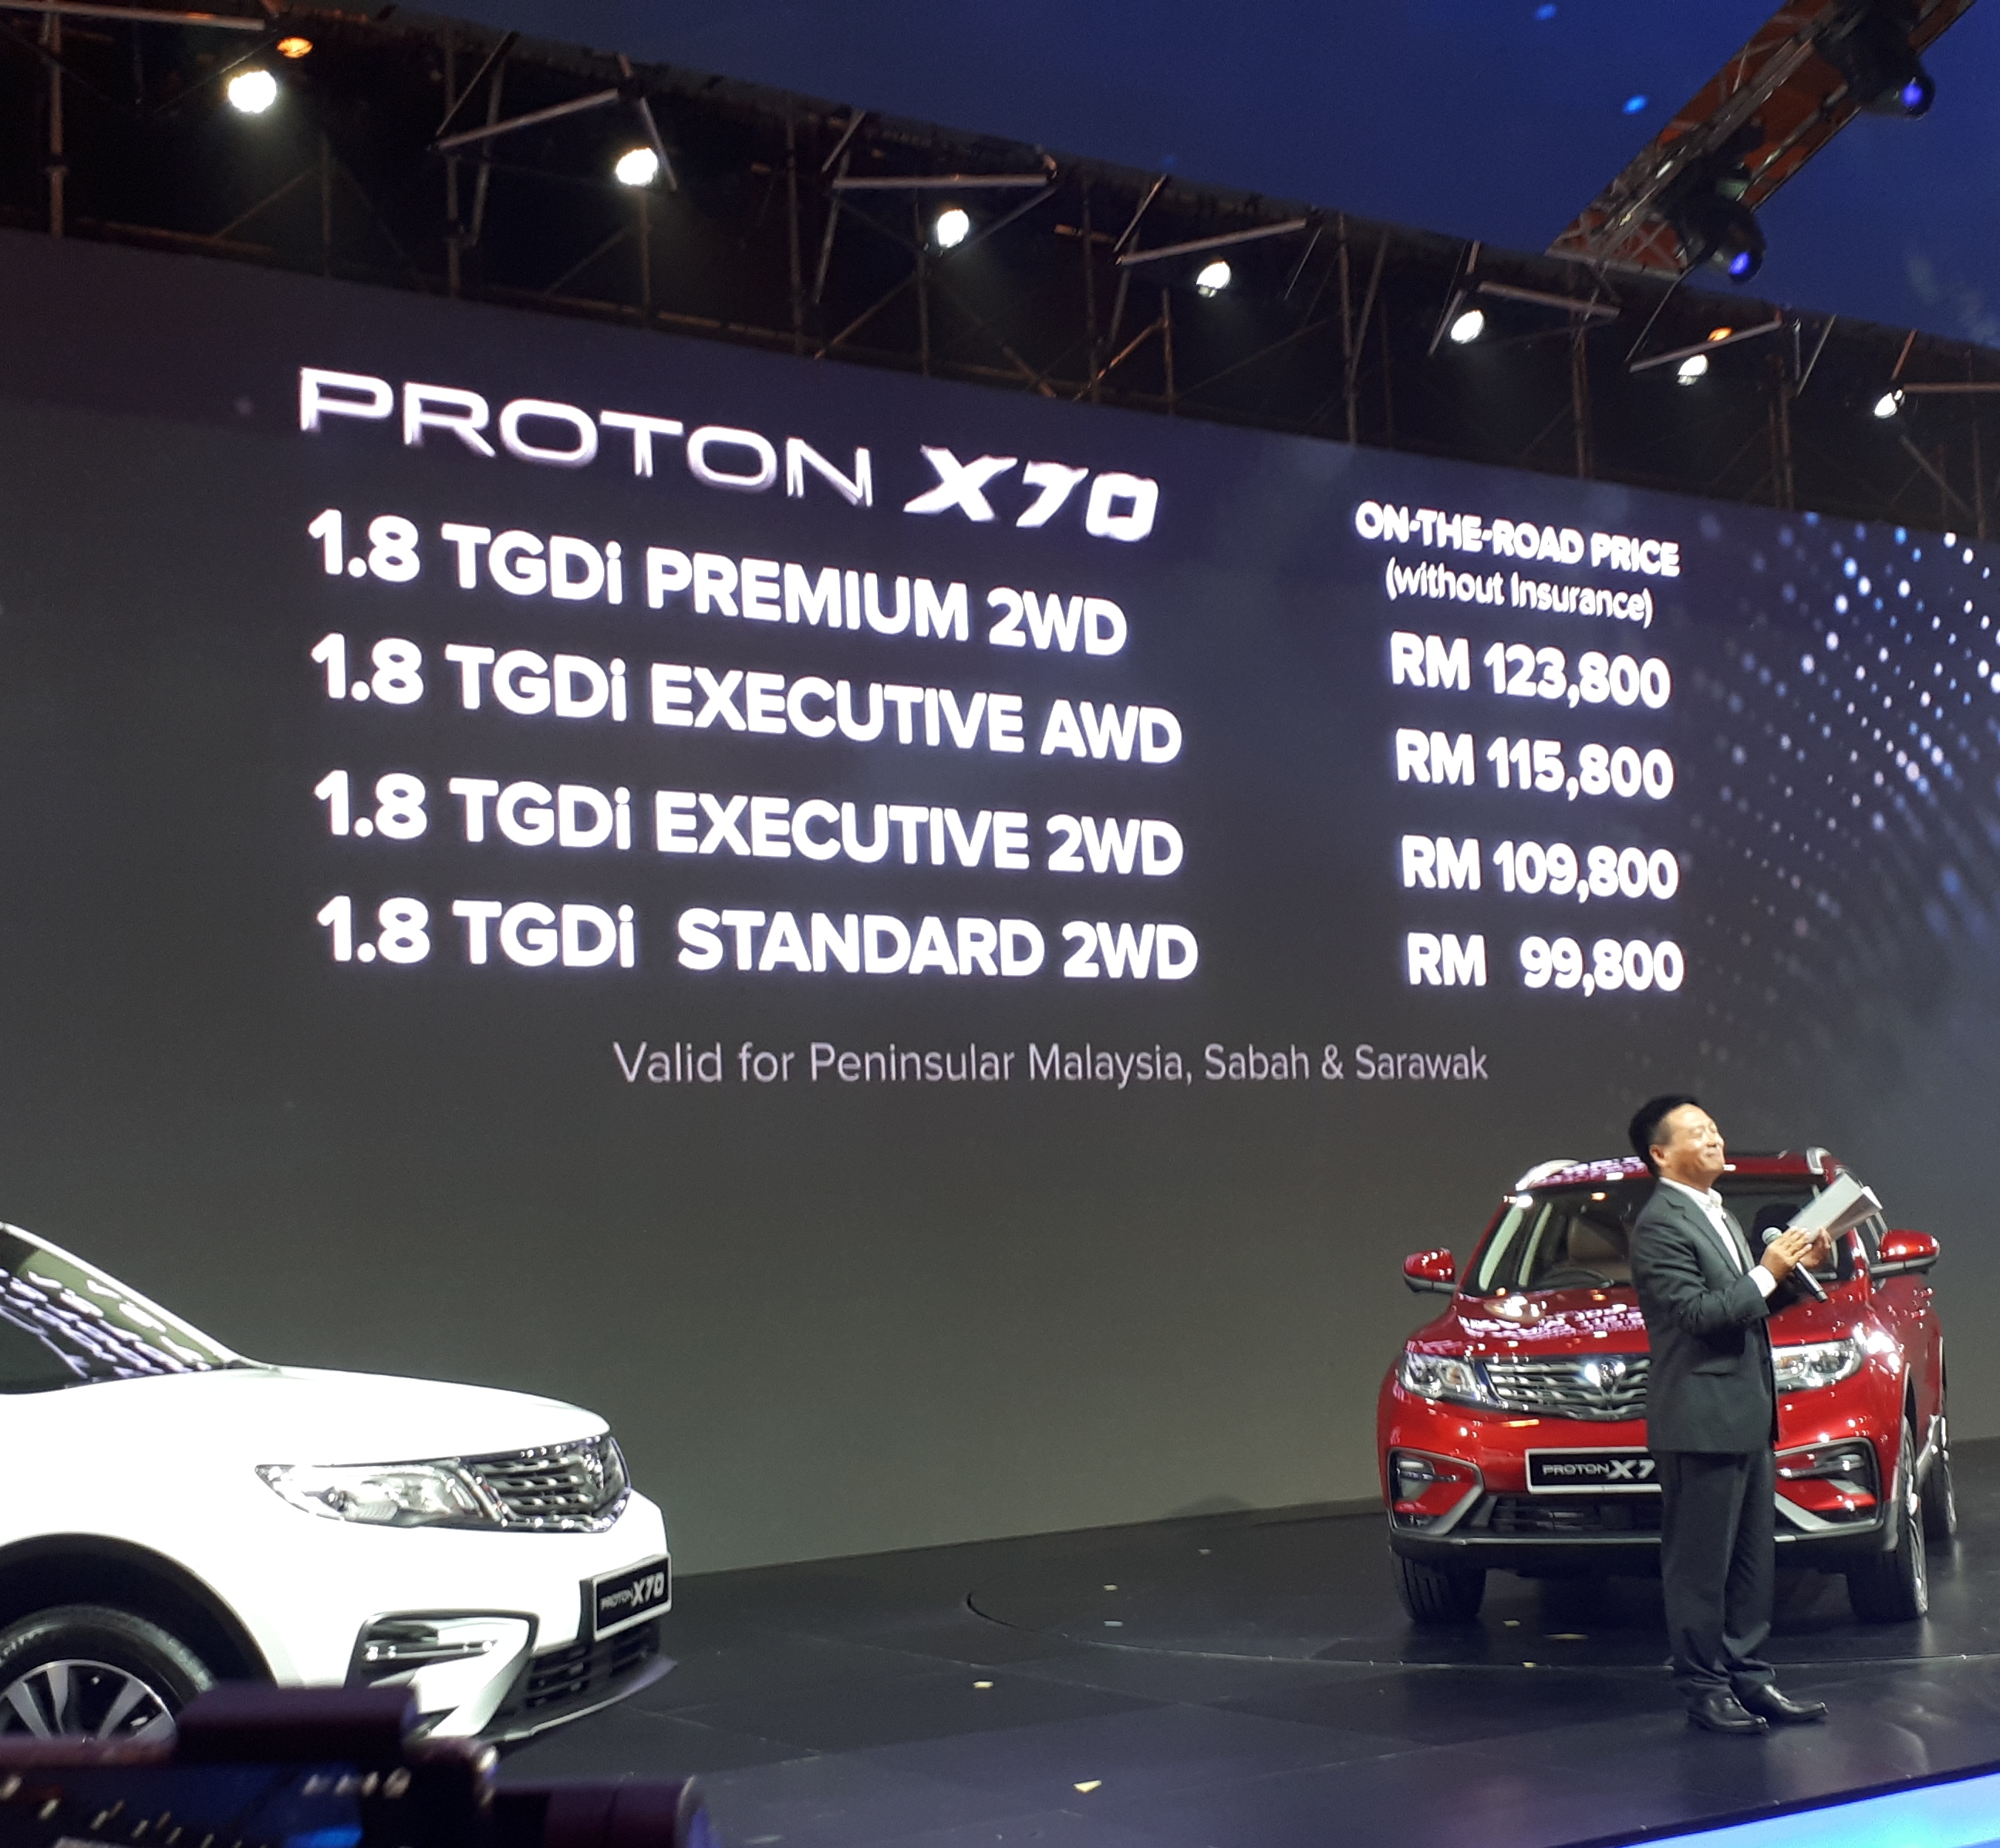 Proton In 2018 – Part 21 Proton X70 SUV Officially Launched, Prices